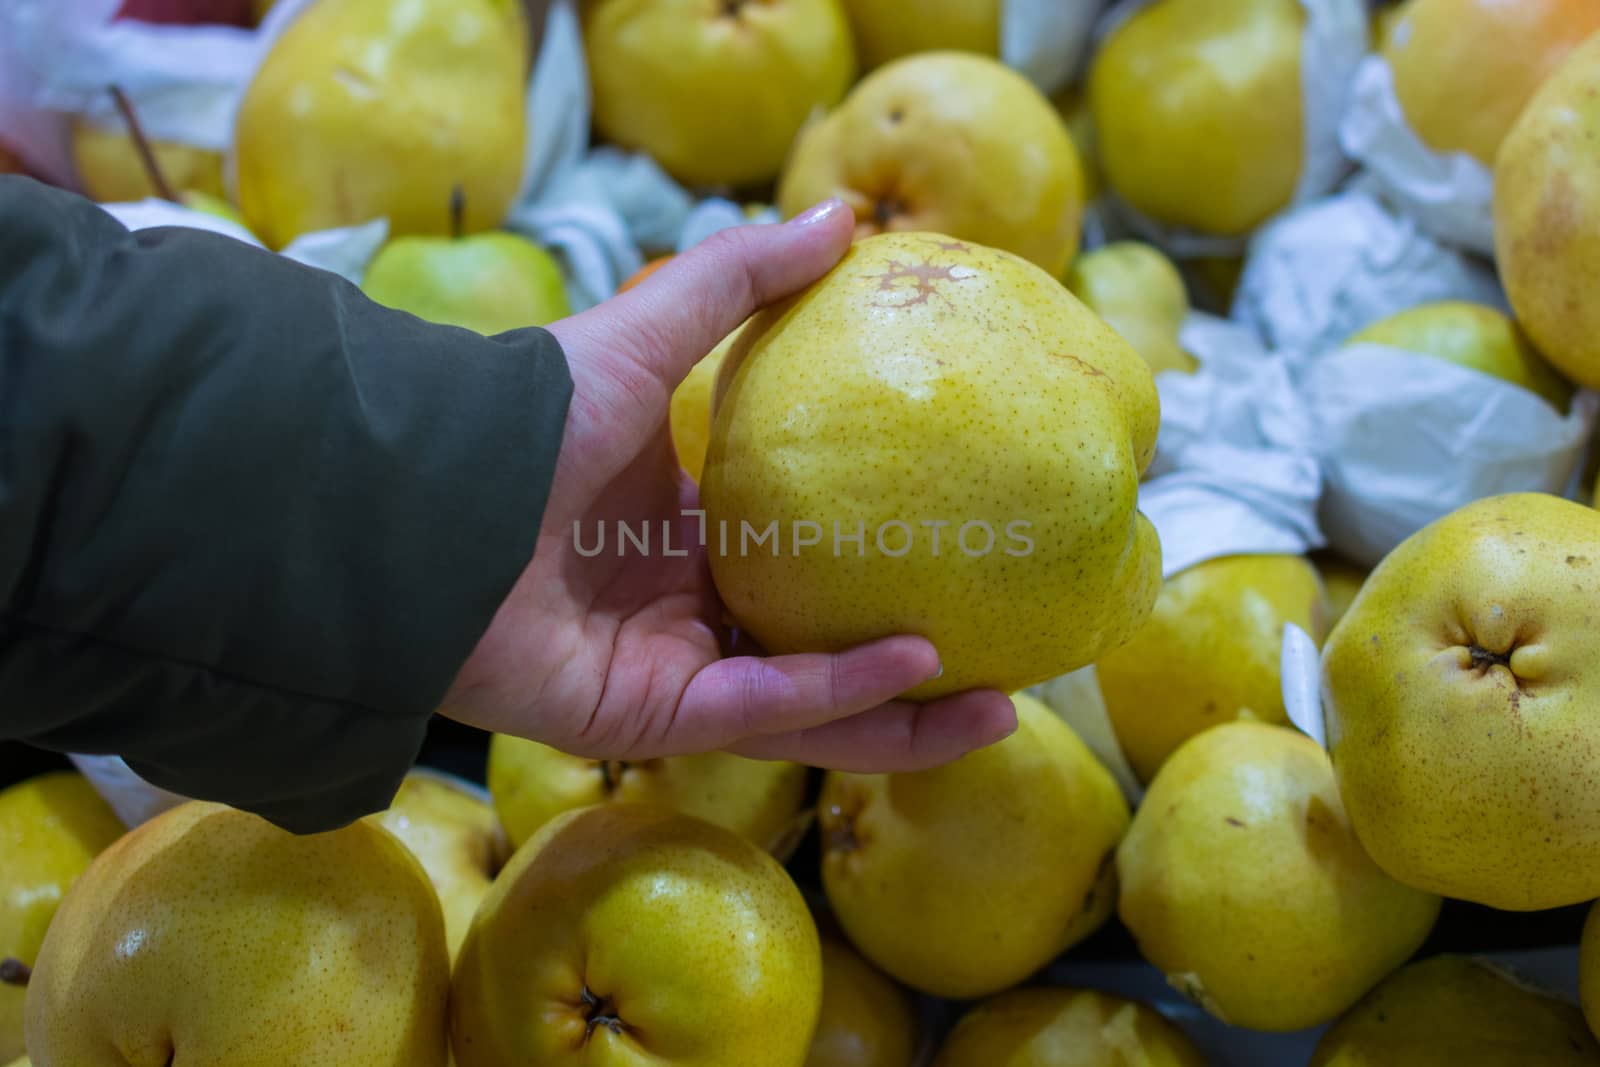 Deveci pears. the wild pear tree grows with its inoculation. Pears specific to Turkey